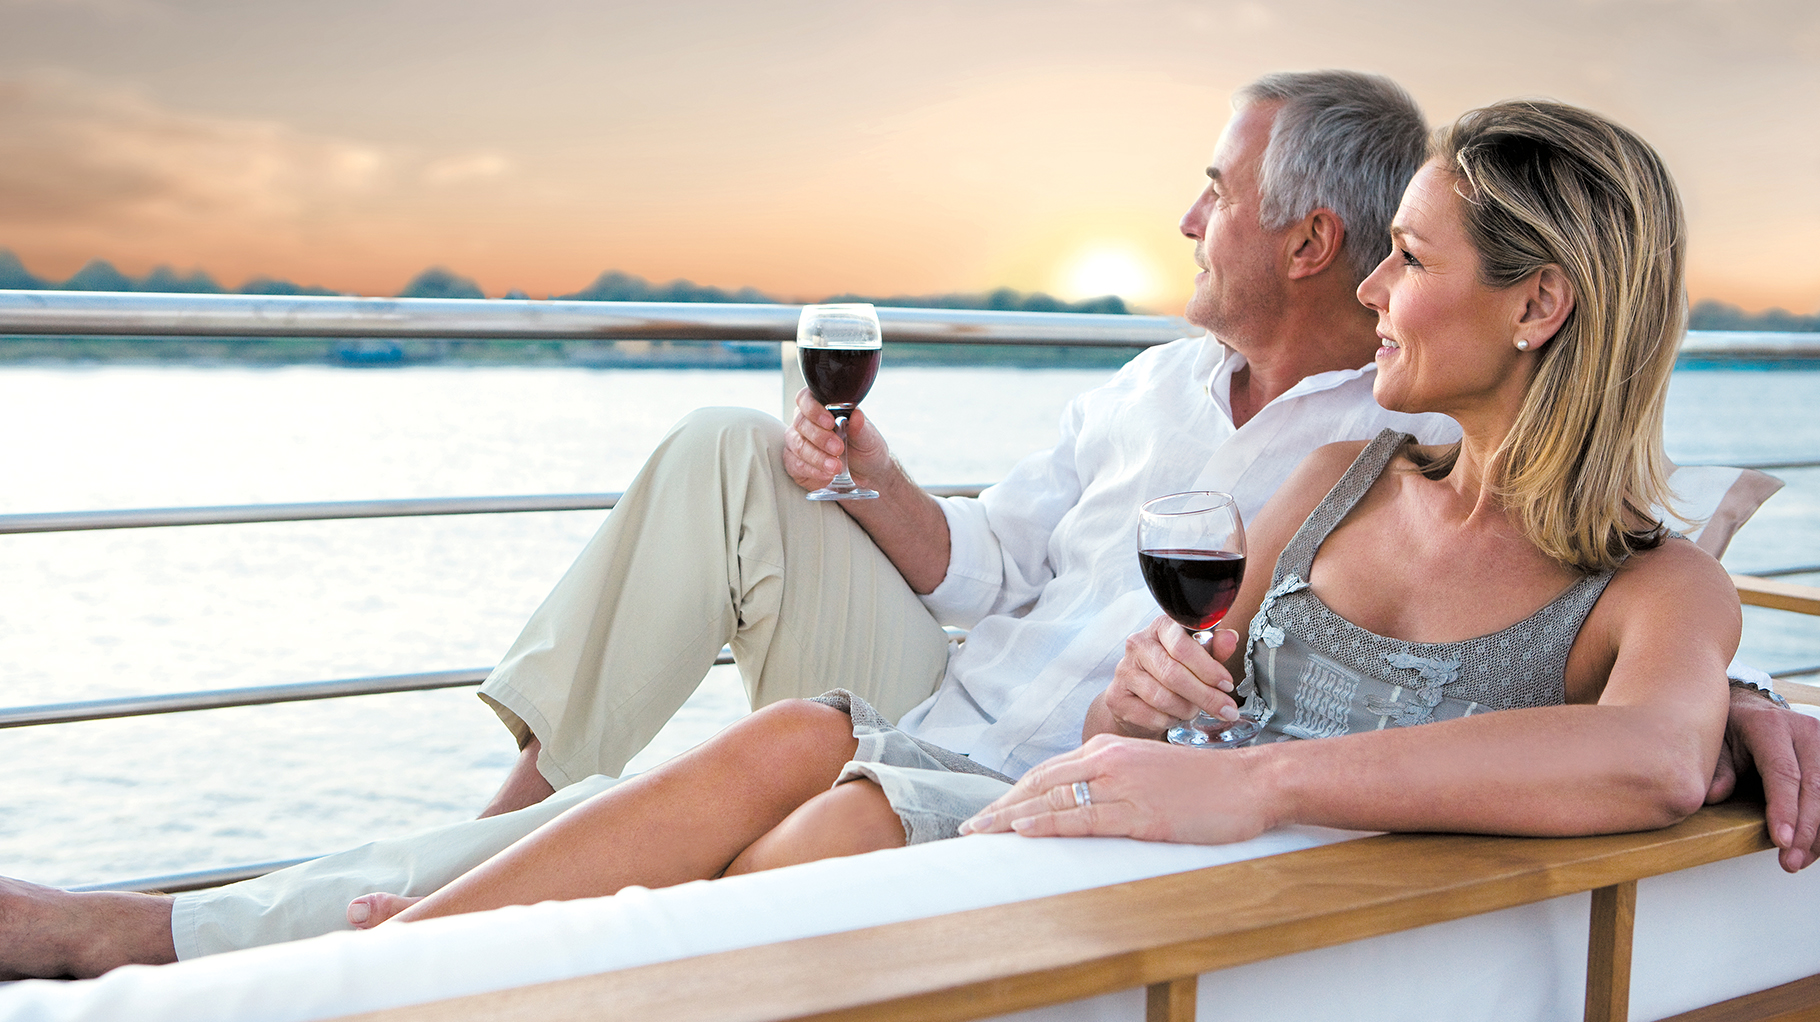 There are great culinary offerings and accommodation designed for seniors looking for long cruises